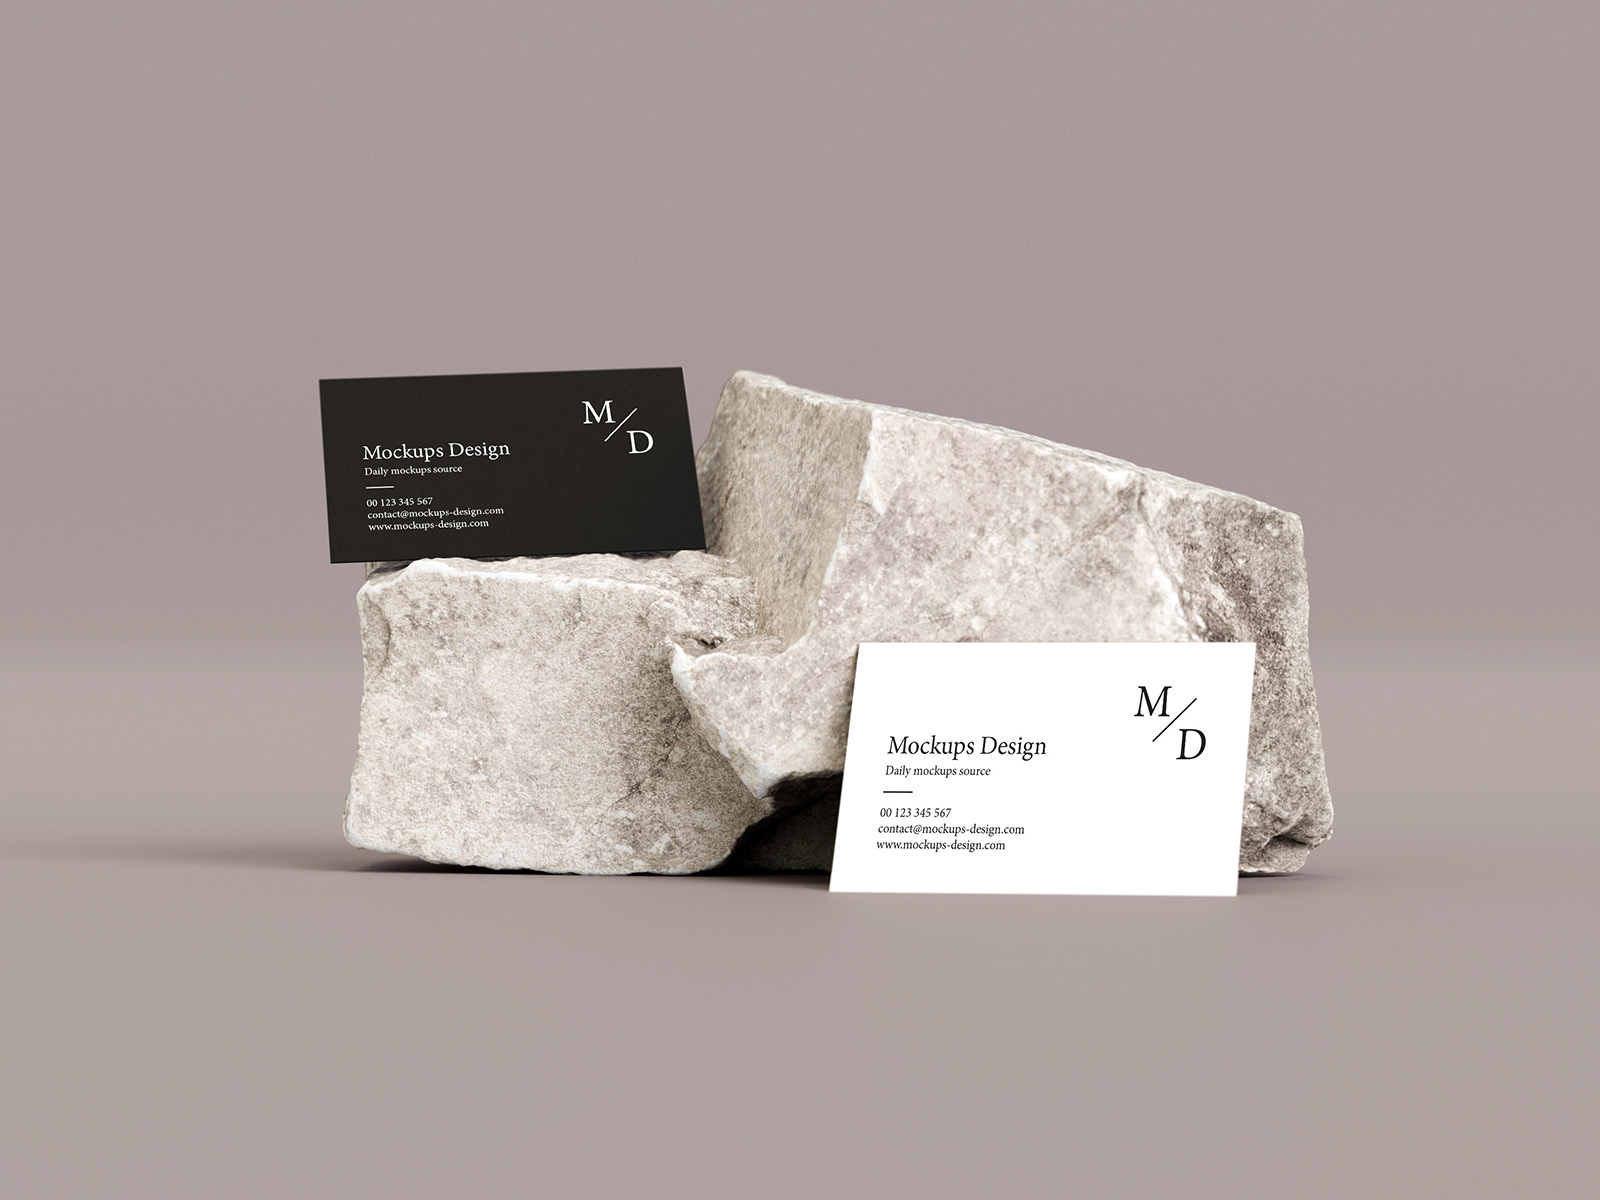 3,5x2 inches business cards on stone mockup